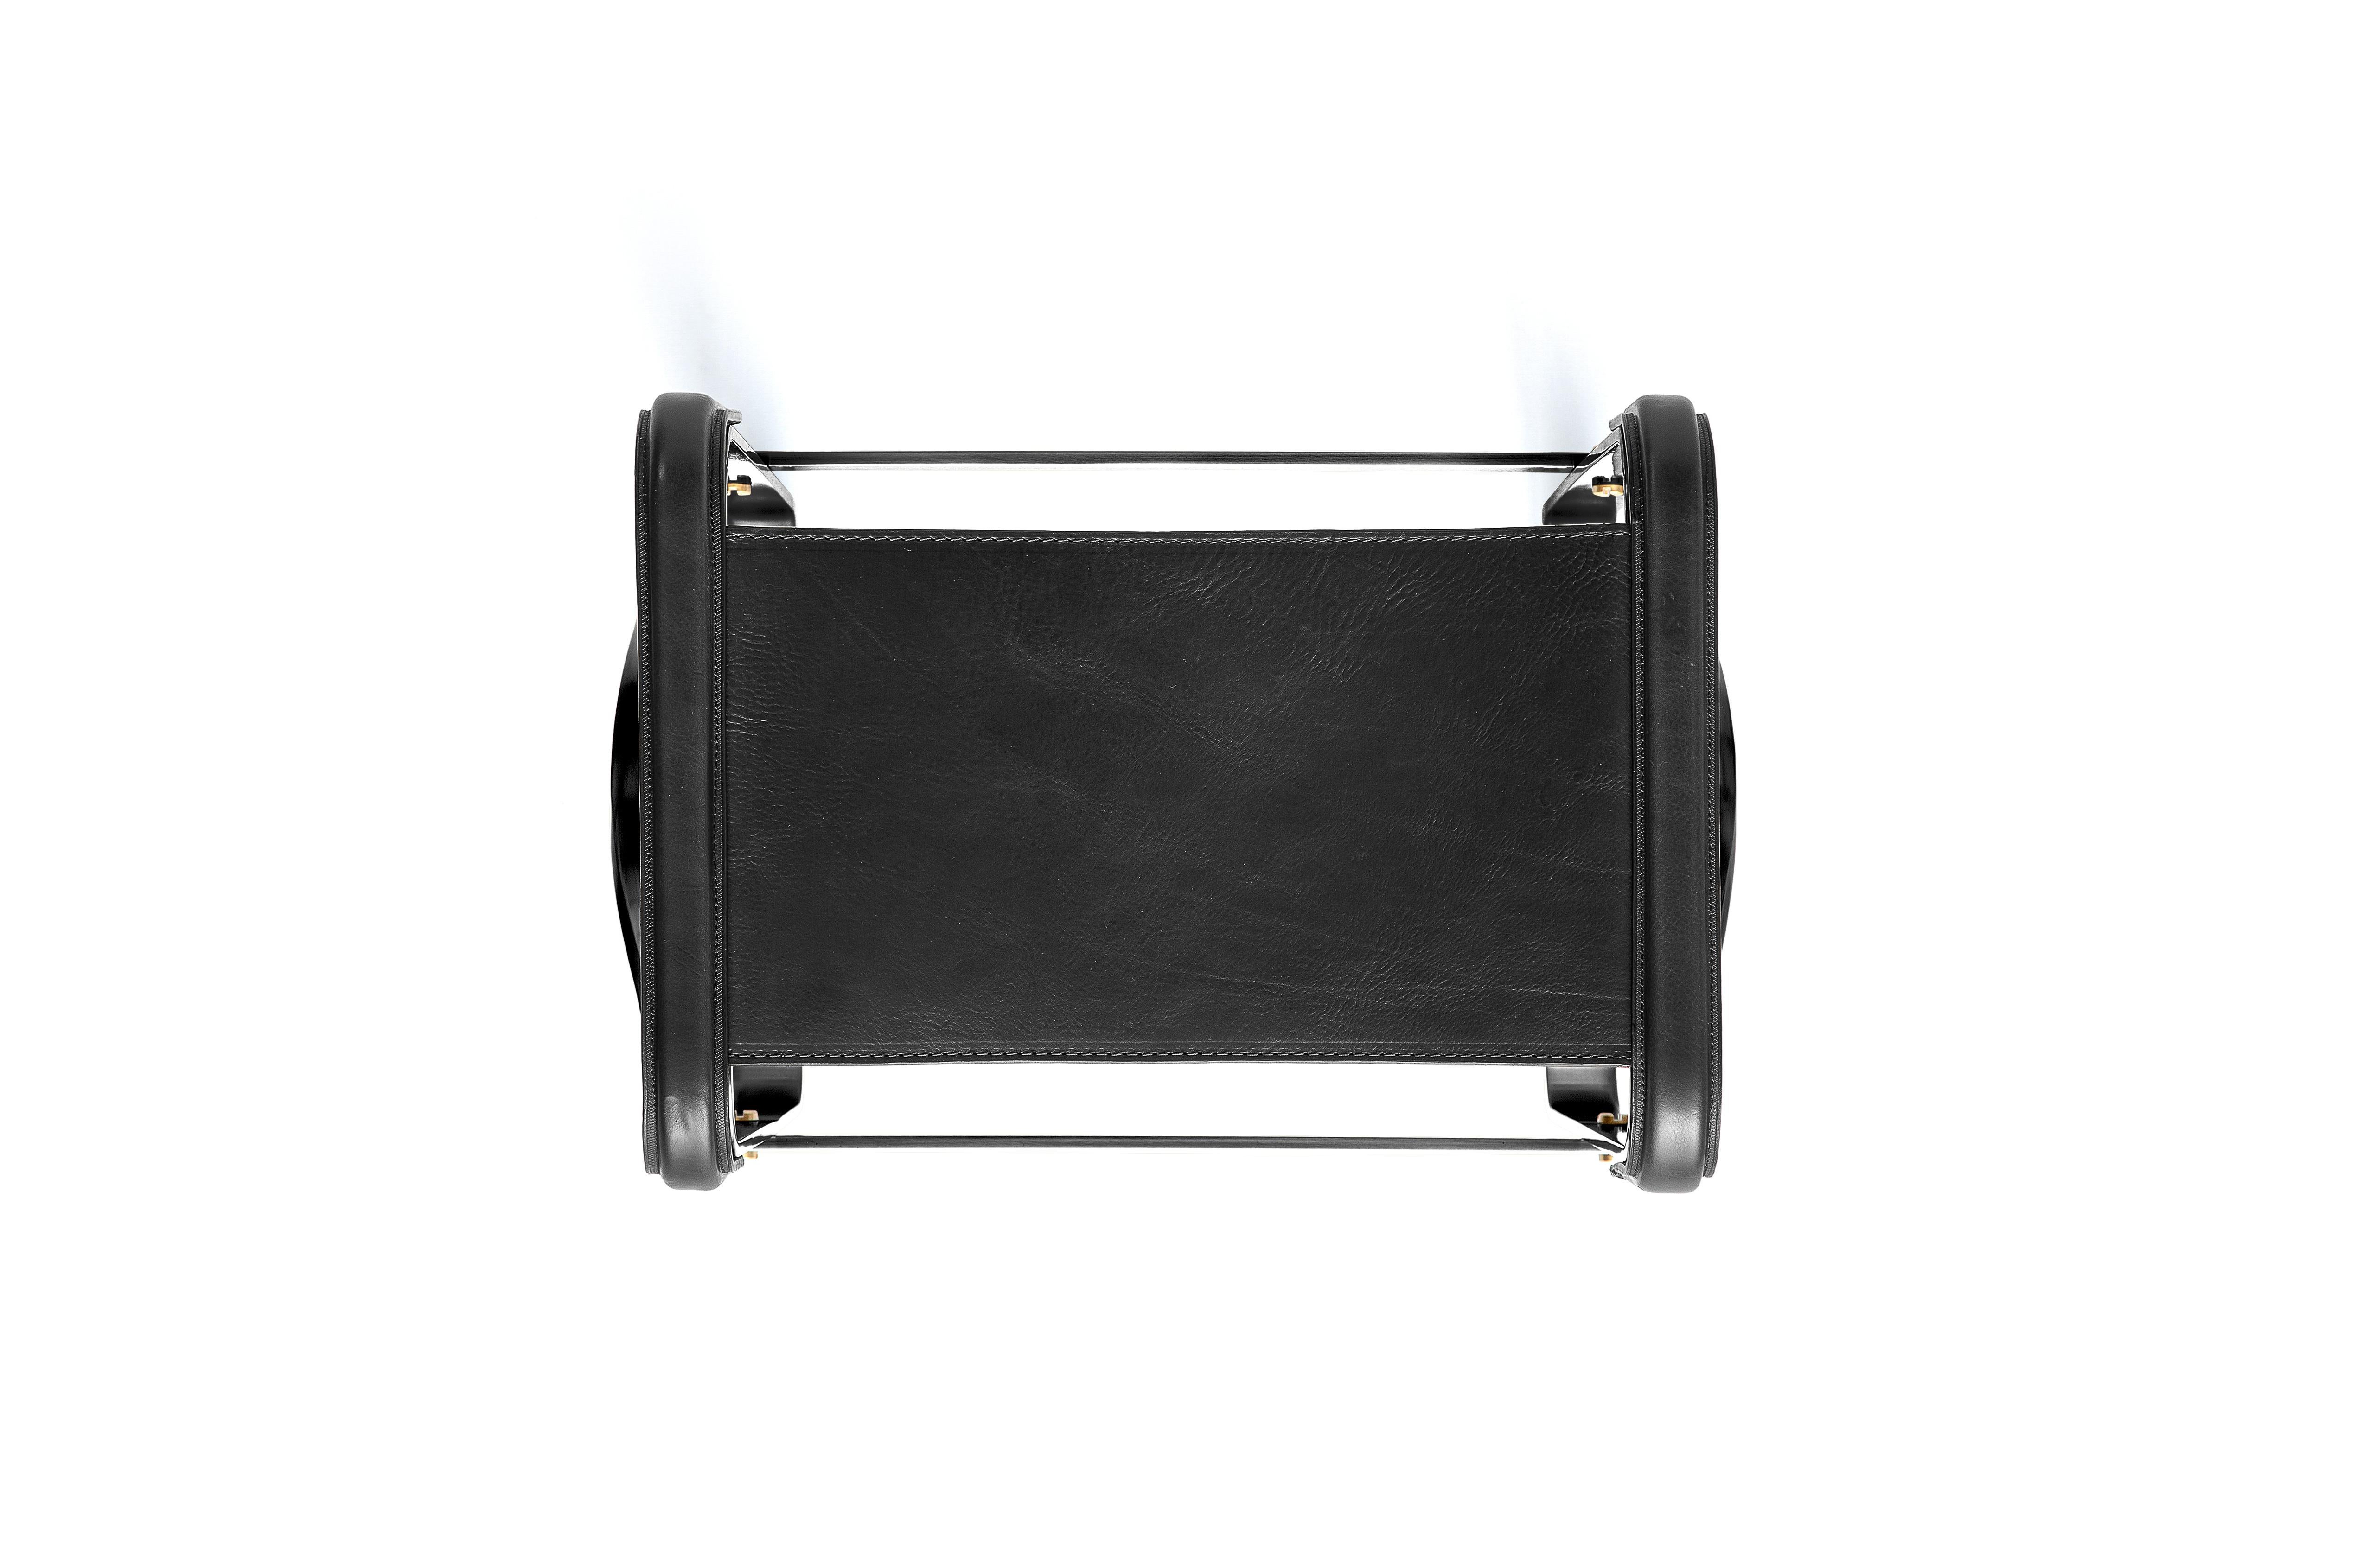 Set of 2 Footstool Black Smoke Steel & Black Leather, Modern Style, Wanderlust In New Condition For Sale In Alcoy, Alicante